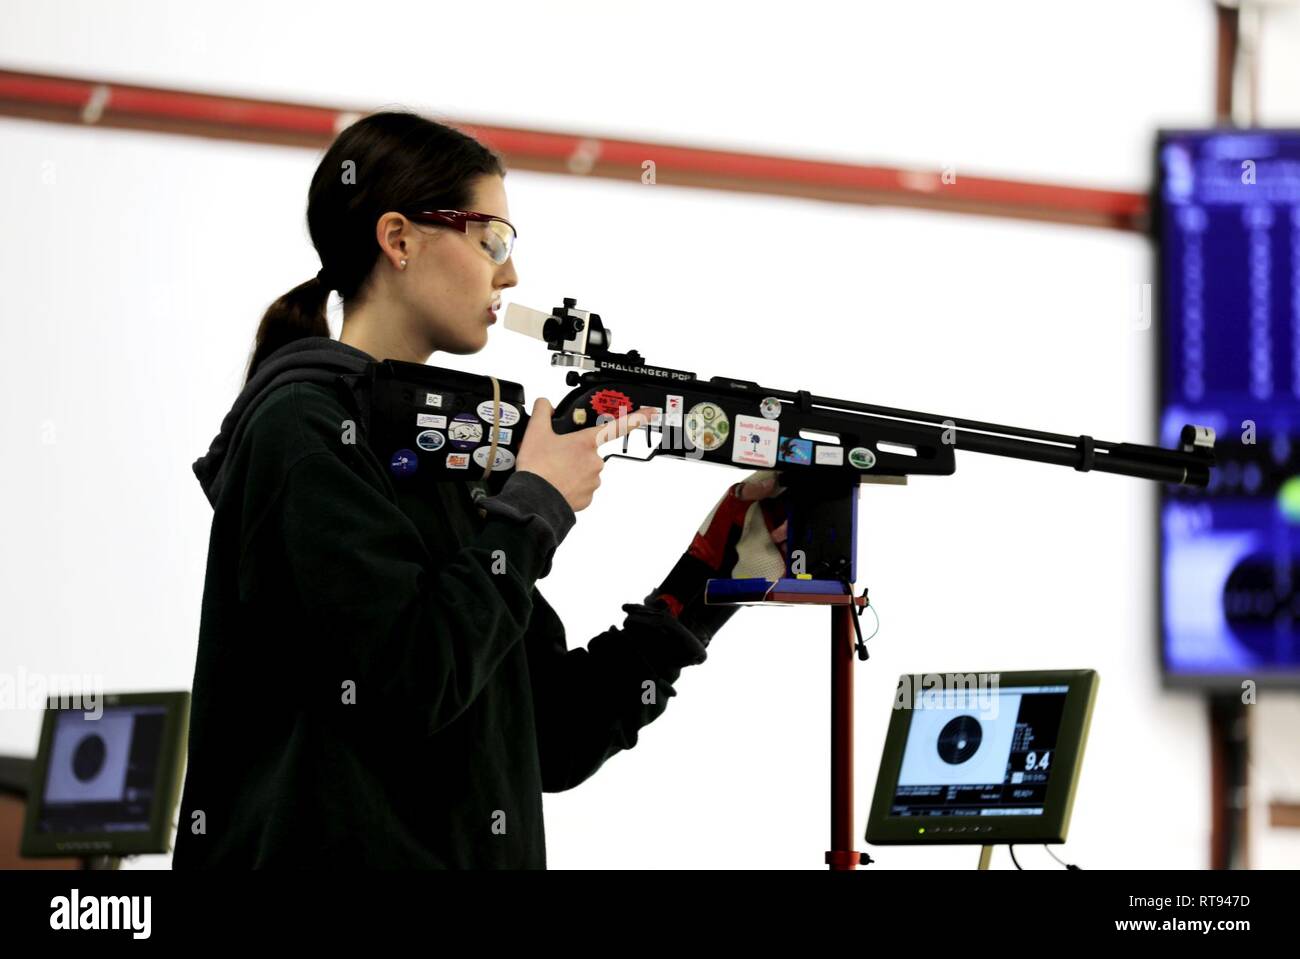 Sarah Leininger from Fort Mill, South Carolina, takes a deep breath before firing at the Day 1 Sporter Finals during the U.S. Army Junior Rifle National Championships at Fort Benning, Georgia January 25, 2019. The three-day, invitation-only event had the youth athletes compete side by side for top individual and team honors in three-position smallbore, sporter rifle and precision rifle. At the end of the competition, Leininger was awarded the title, 2019 Junior National Sporter Champion, with a score of 1131 and 41X. Stock Photo